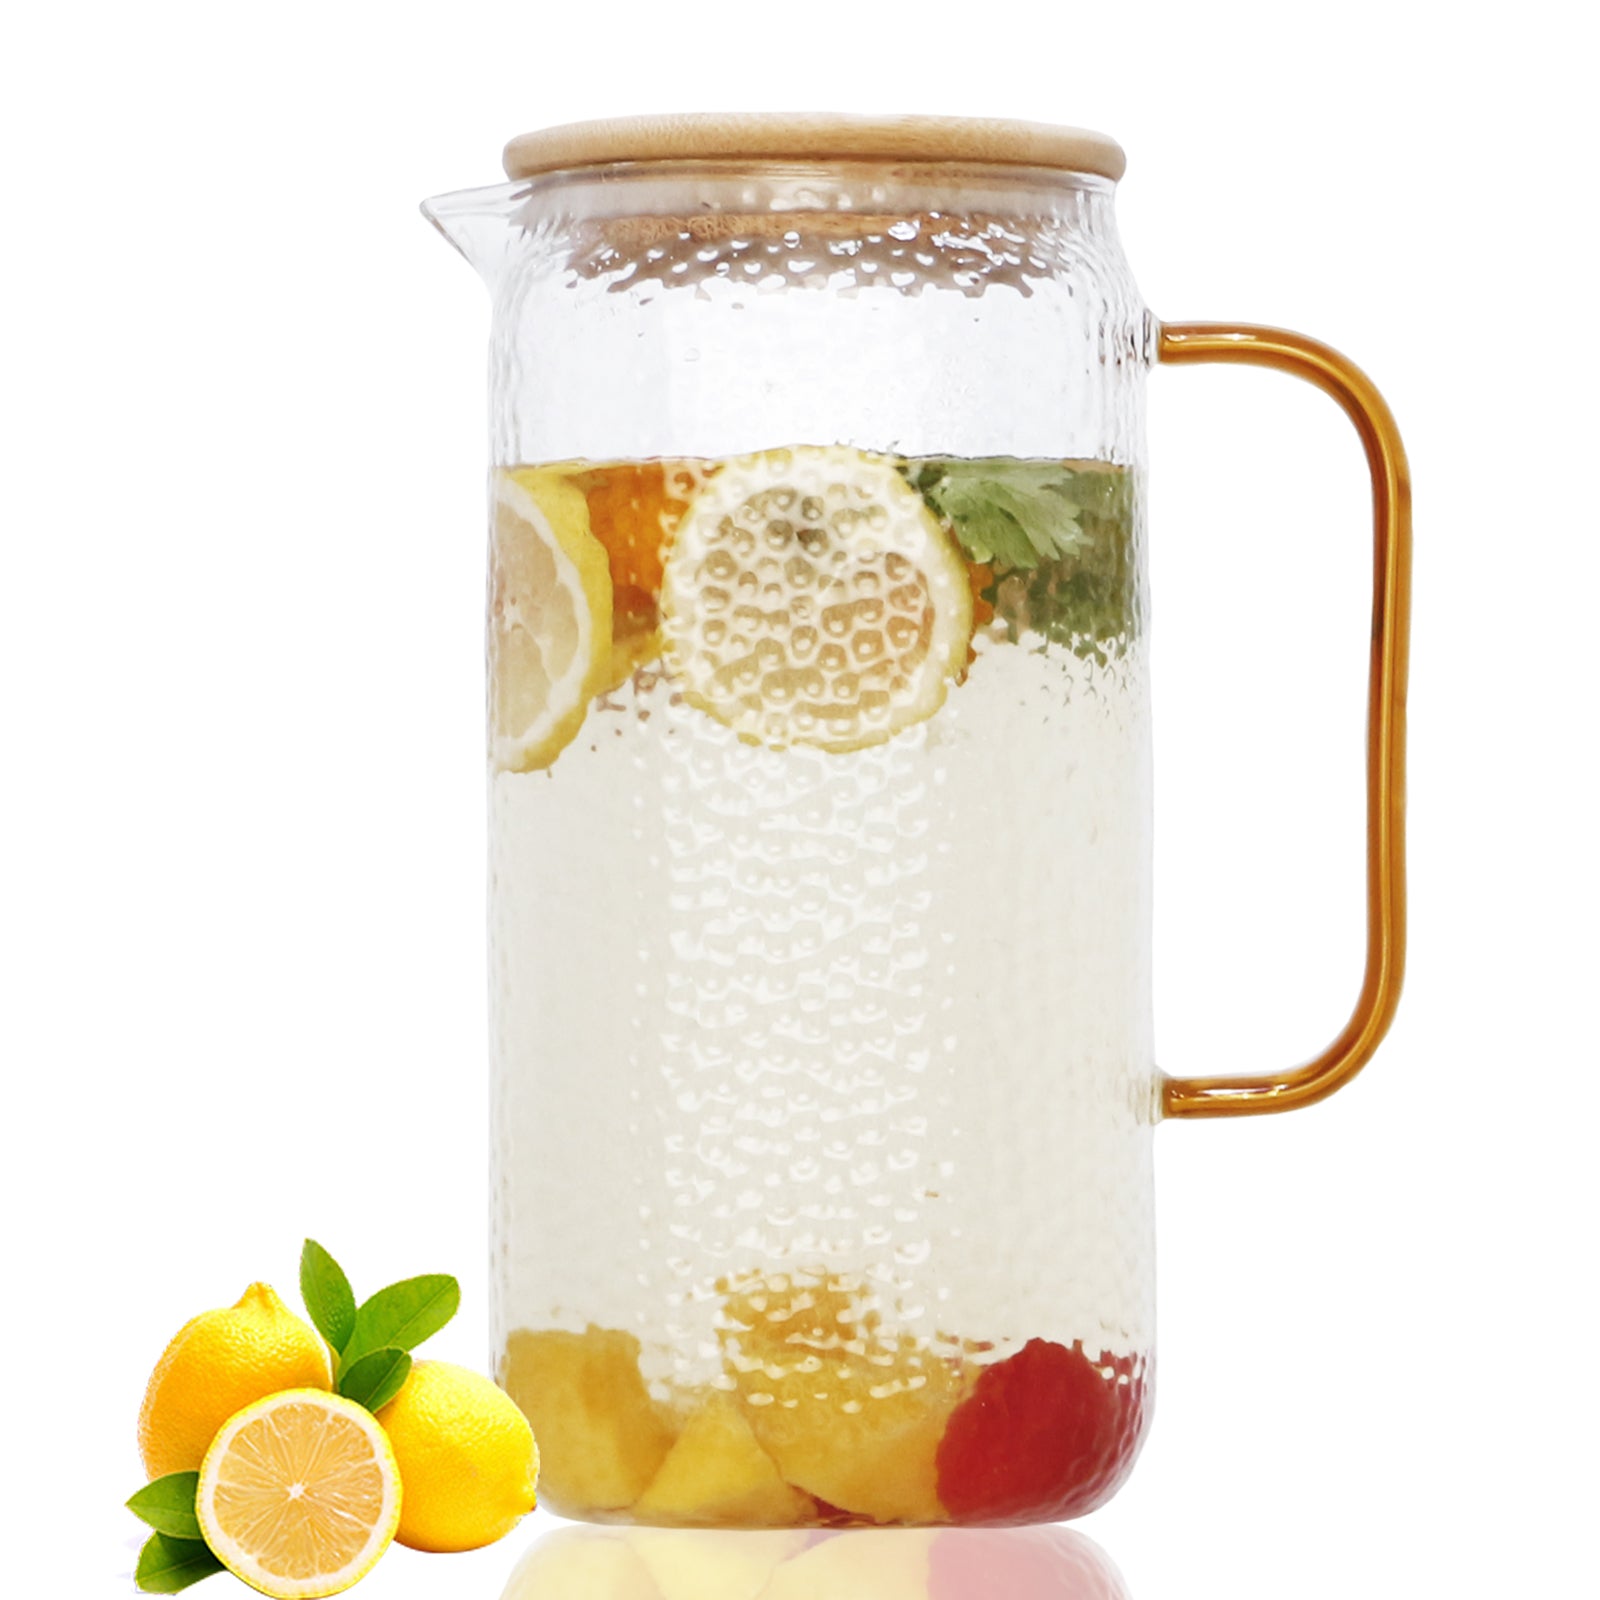 Yirilan Glass Pitcher, 2 Liter/68 OZ Water Pitcher with Lid and